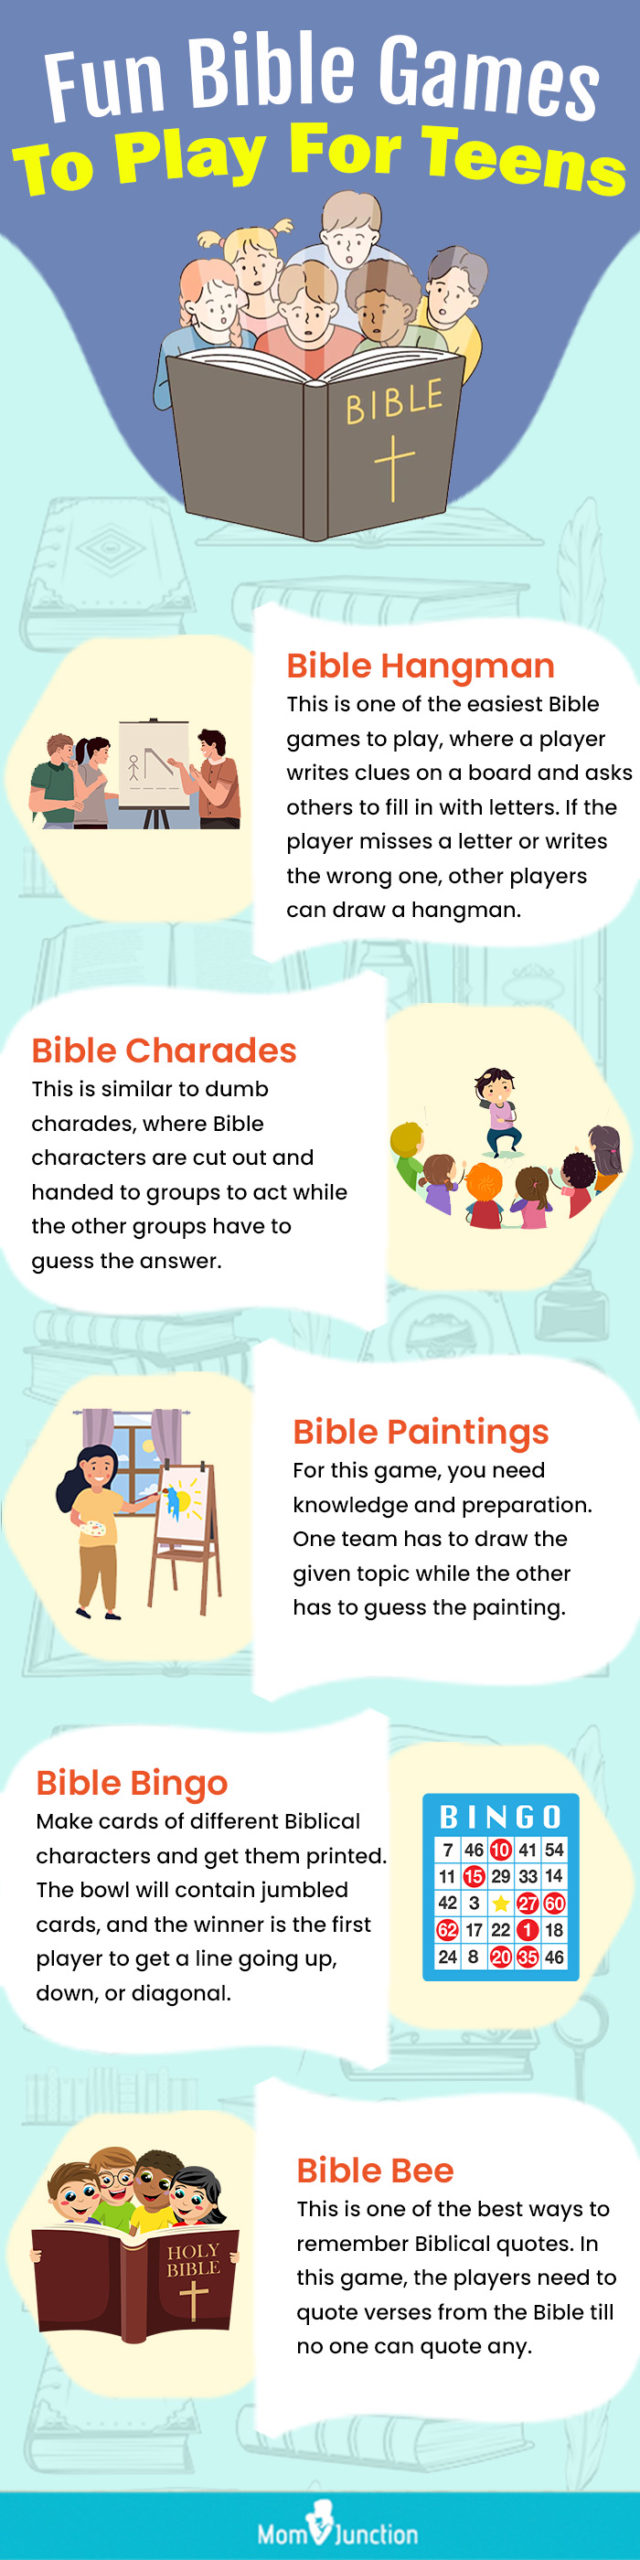 fun bible games to play for teens (infographic)